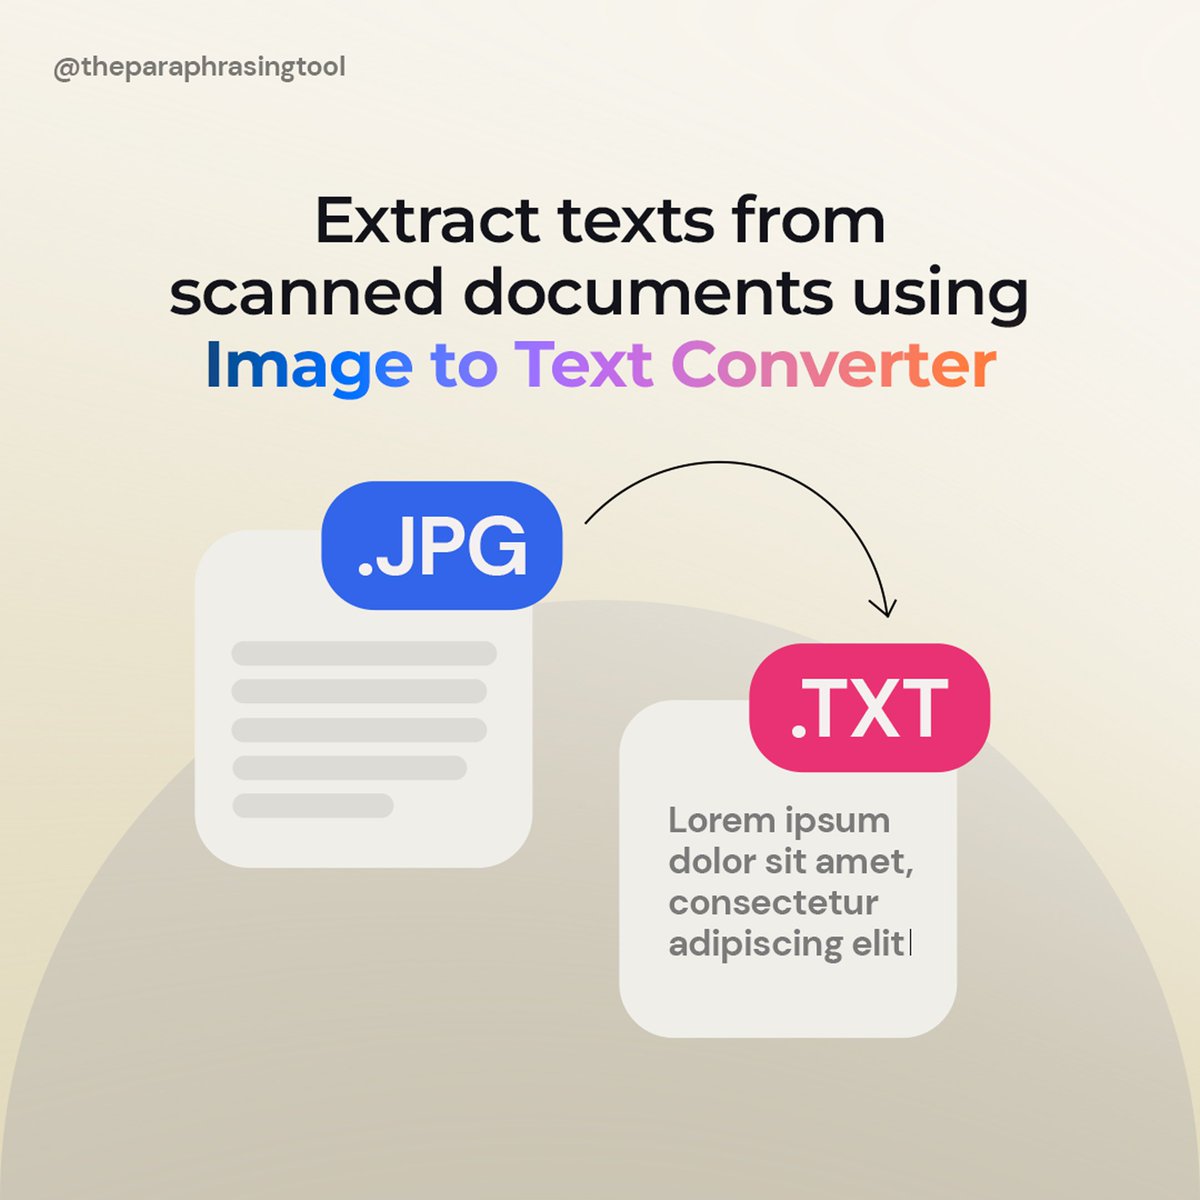 Type Less, Learn More! 📝🧠
Unleash the potential of your lecture screenshots with our Image-to-Text tool.

#StressFreeStudying #TechUpgrade #paraphrasingtool #exploremore #aitool #imagetotext #learnmore #nomoretyping